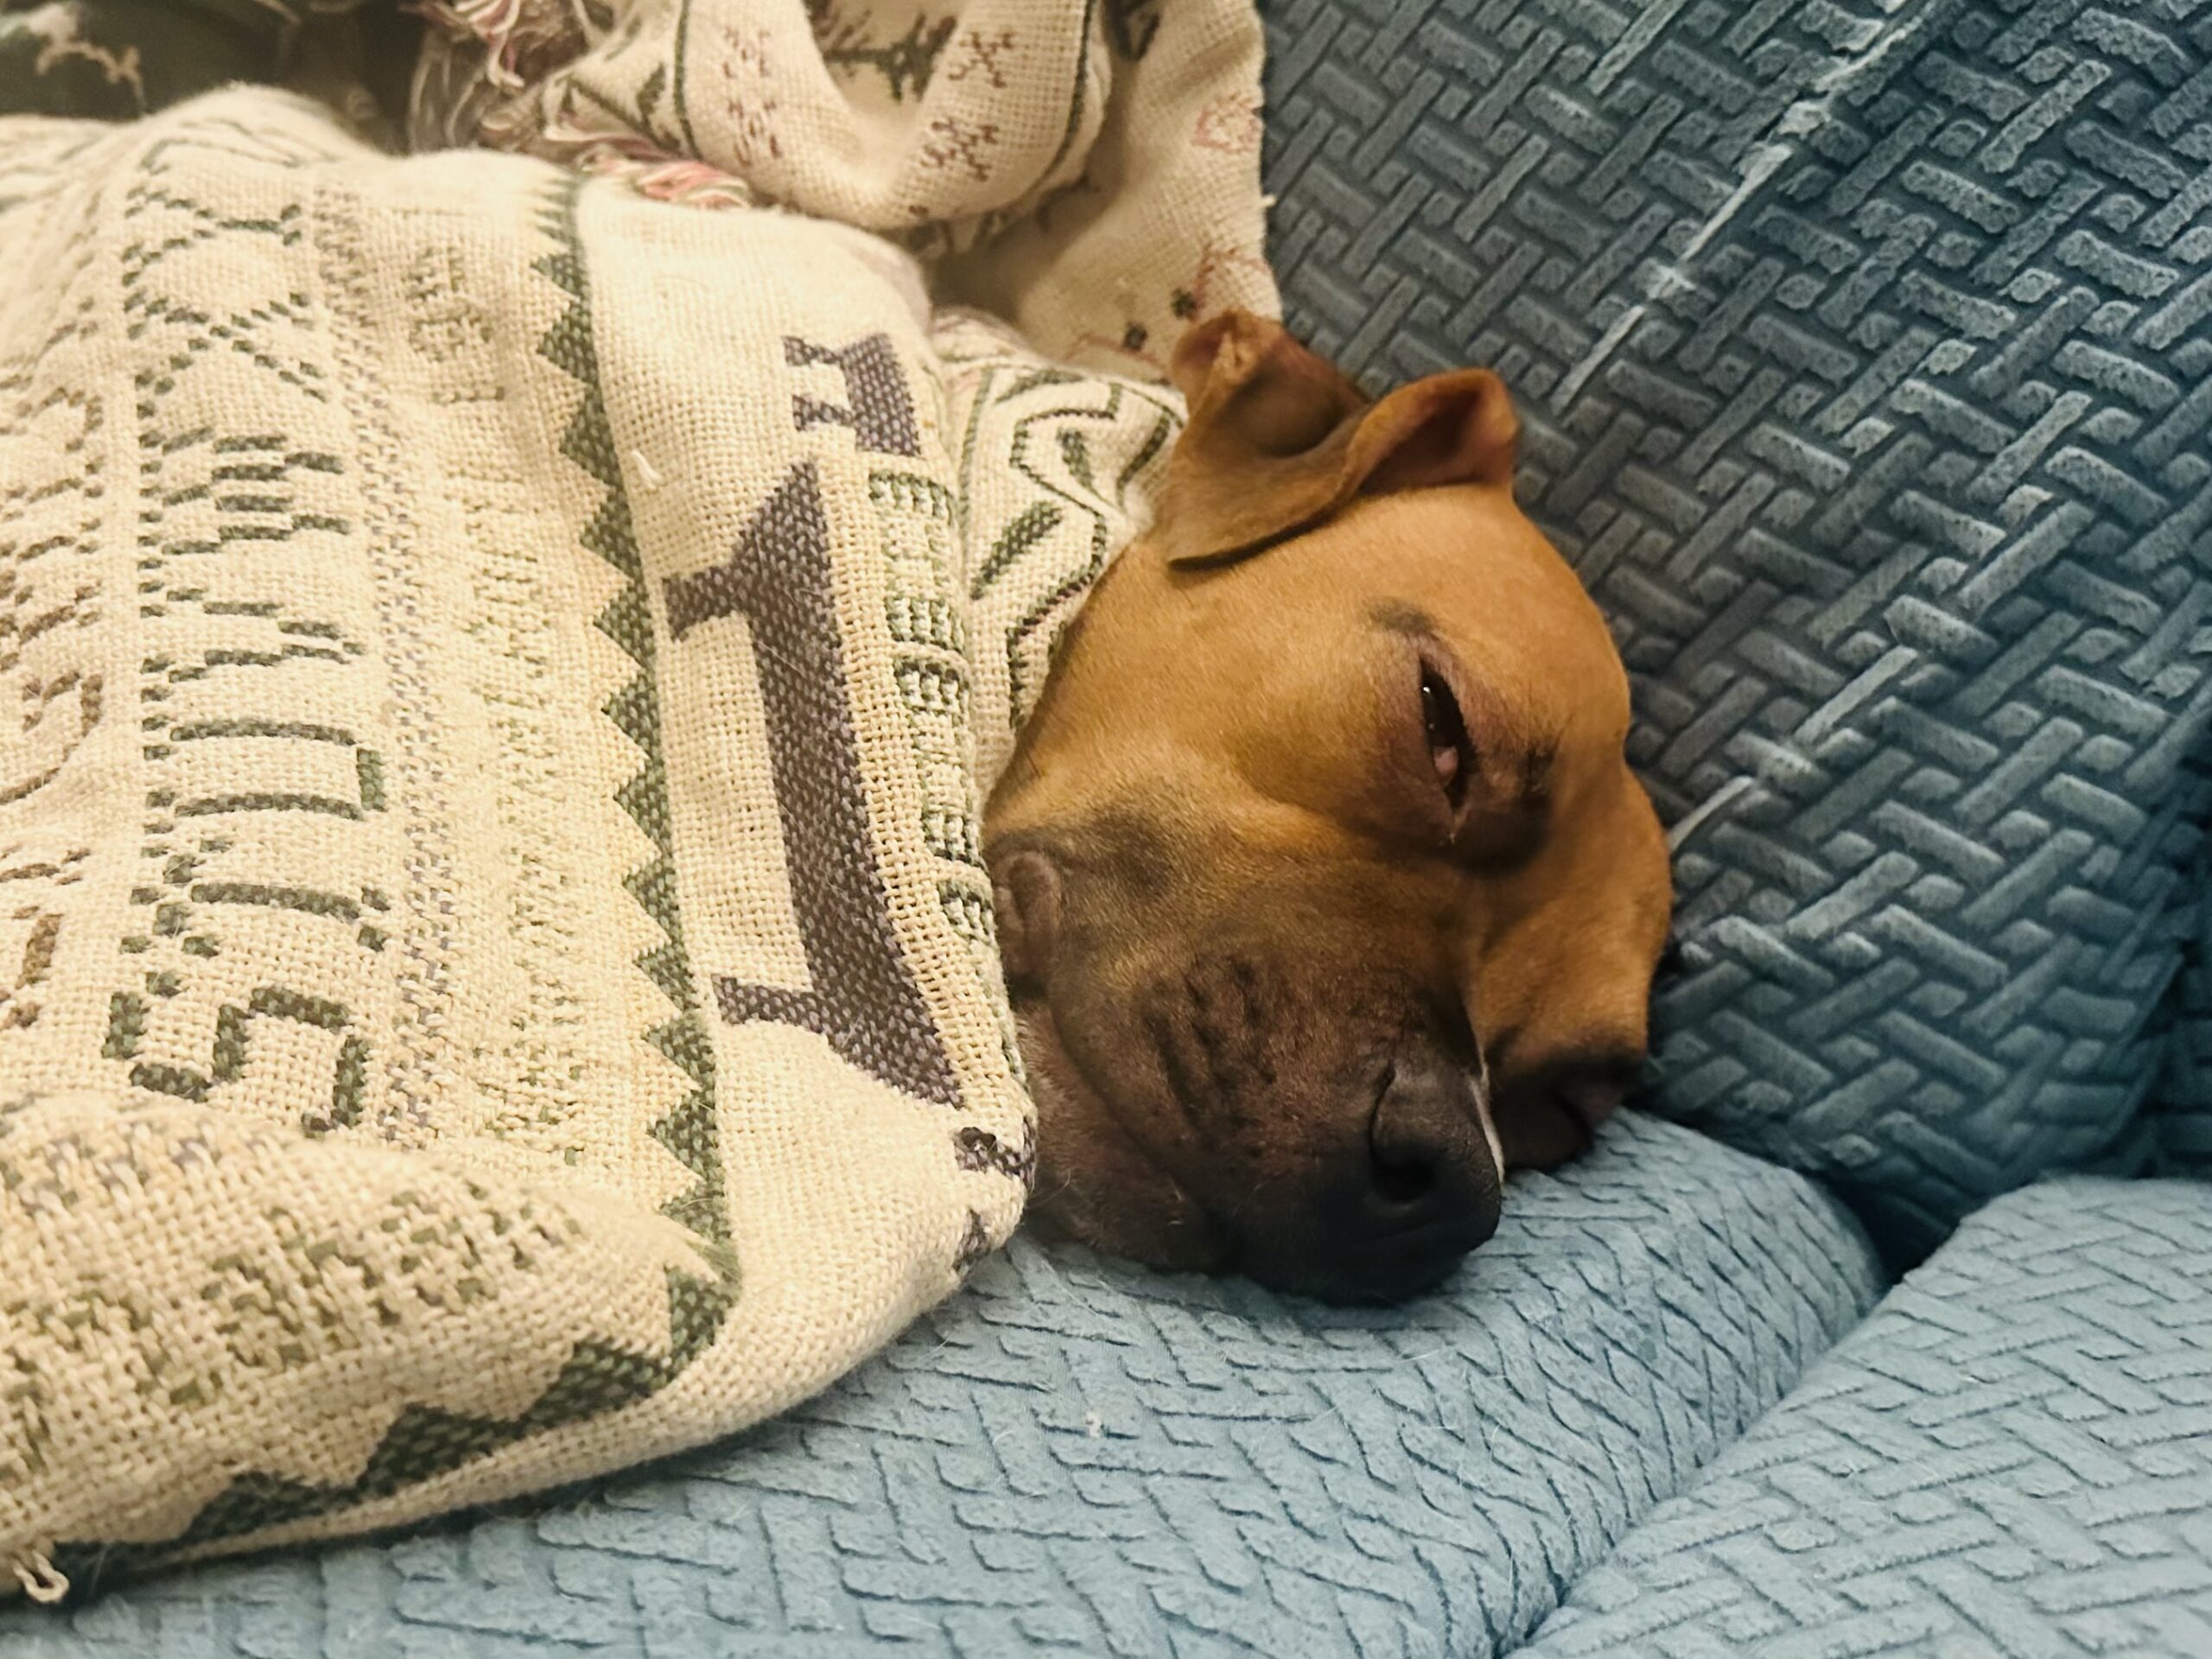 Katsu the dog tucked up in a blanket